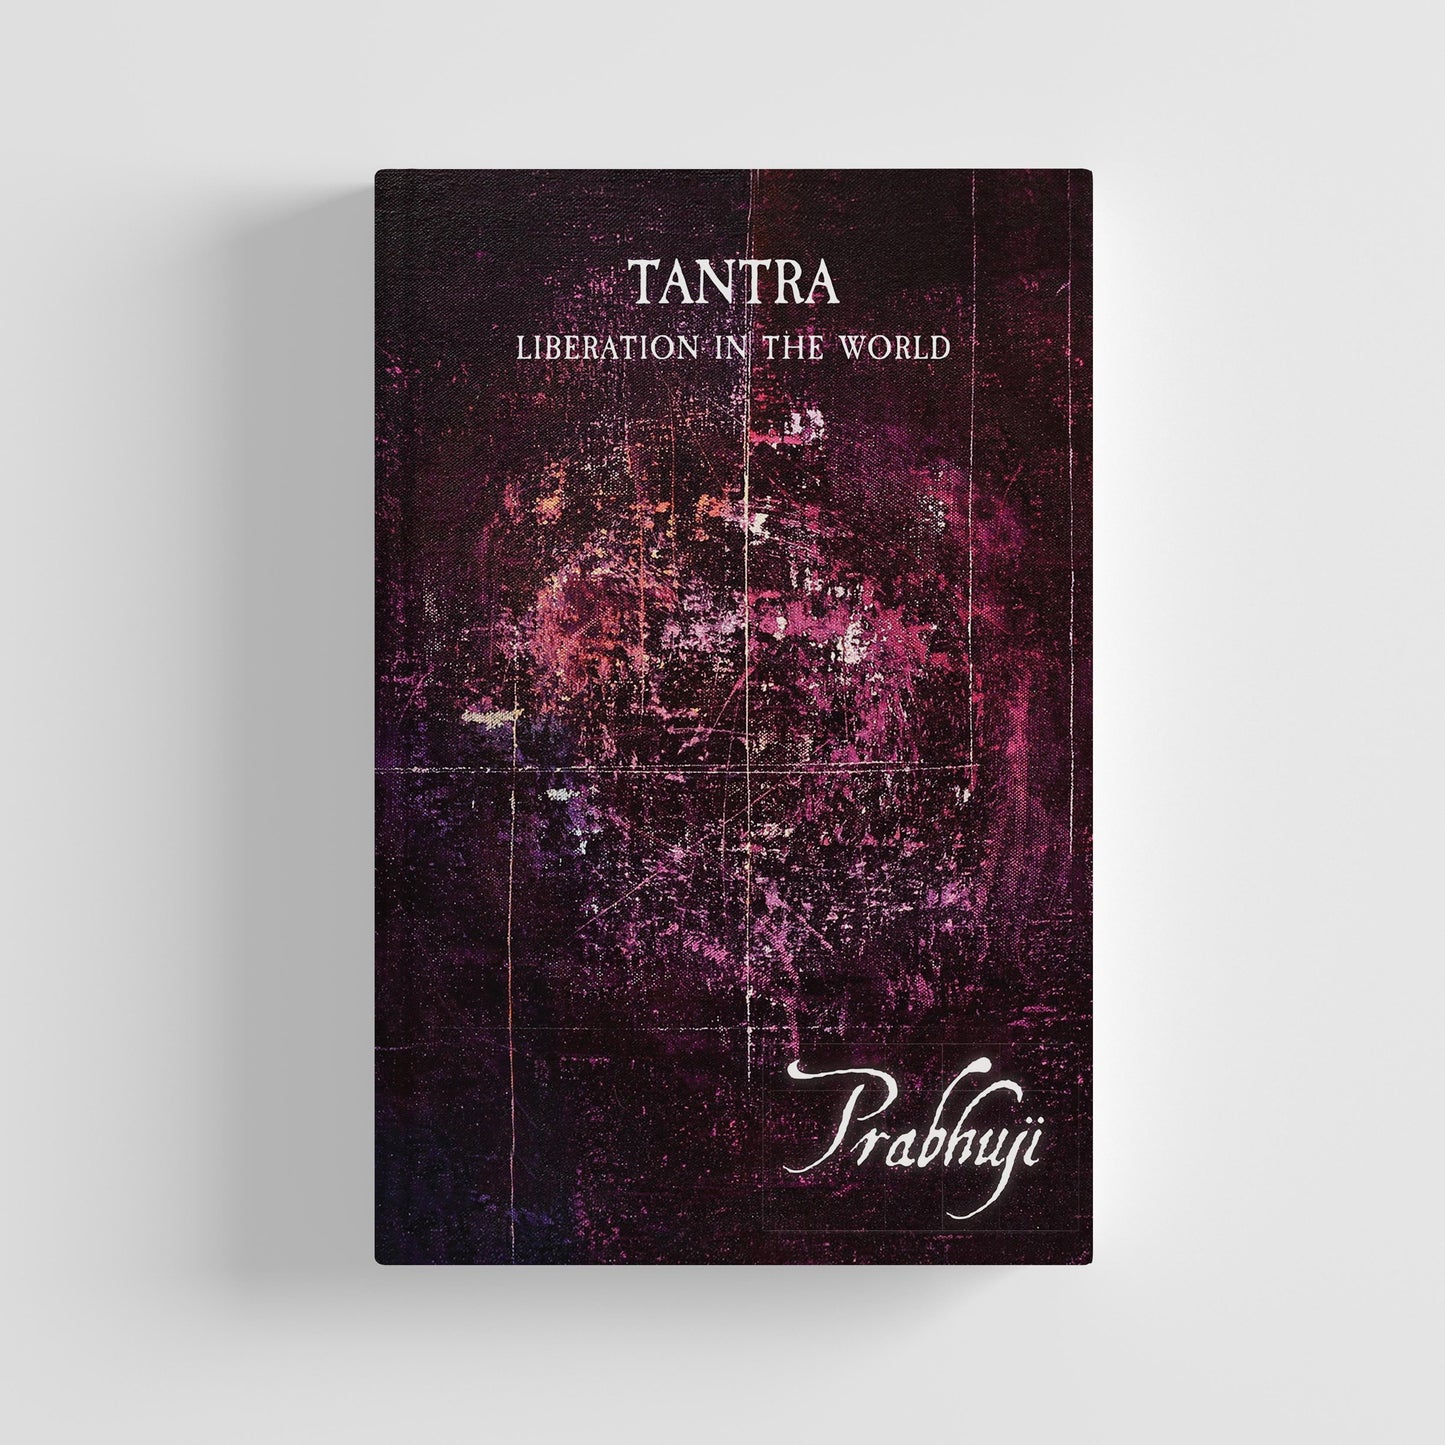 Book Tantra - Liberation in the world by Prabhuji (Hard cover - English)